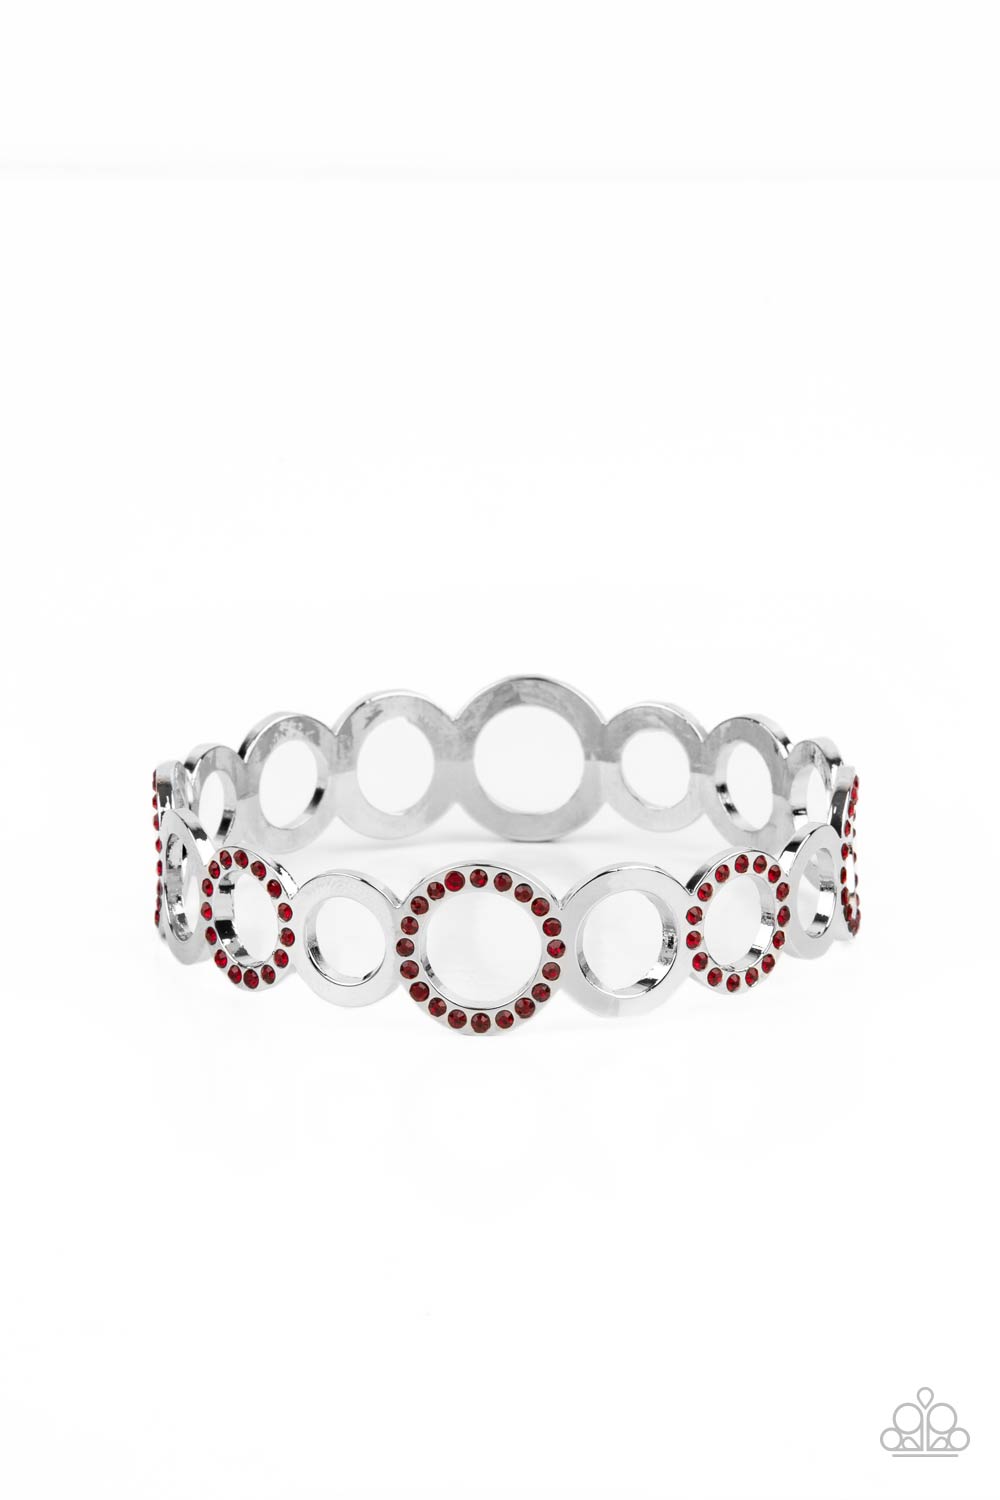 Paparazzi - Future, Past, and POLISHED -  Red Bracelet - Alies Bling Bar